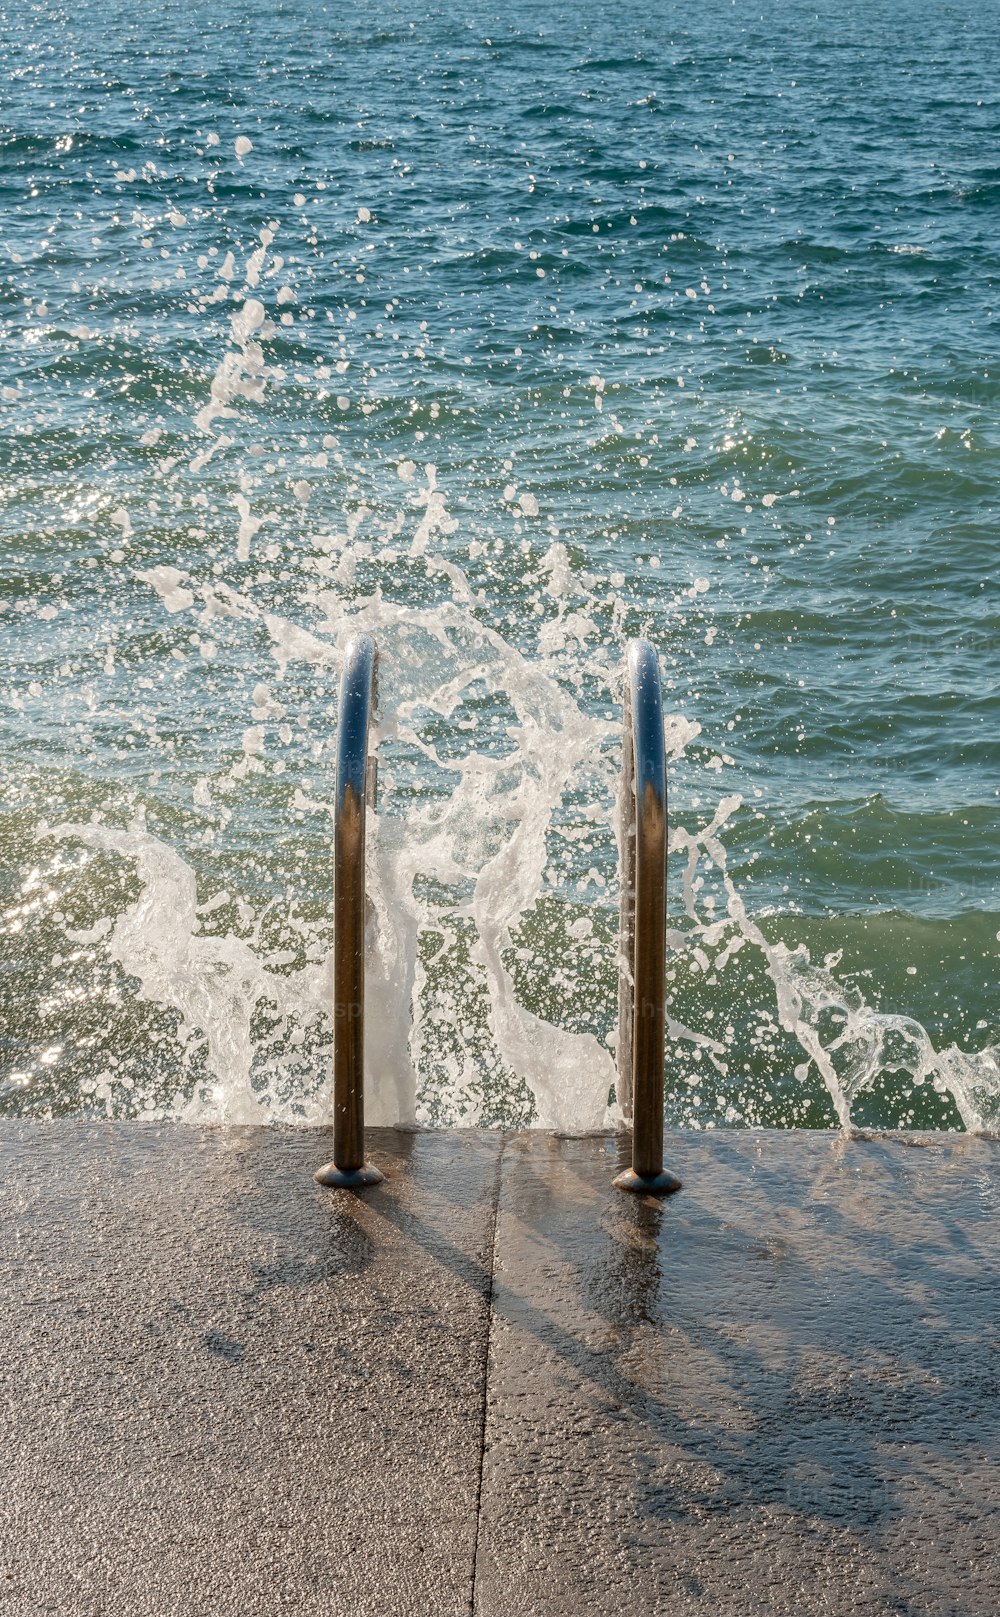 a couple of poles that are by some water